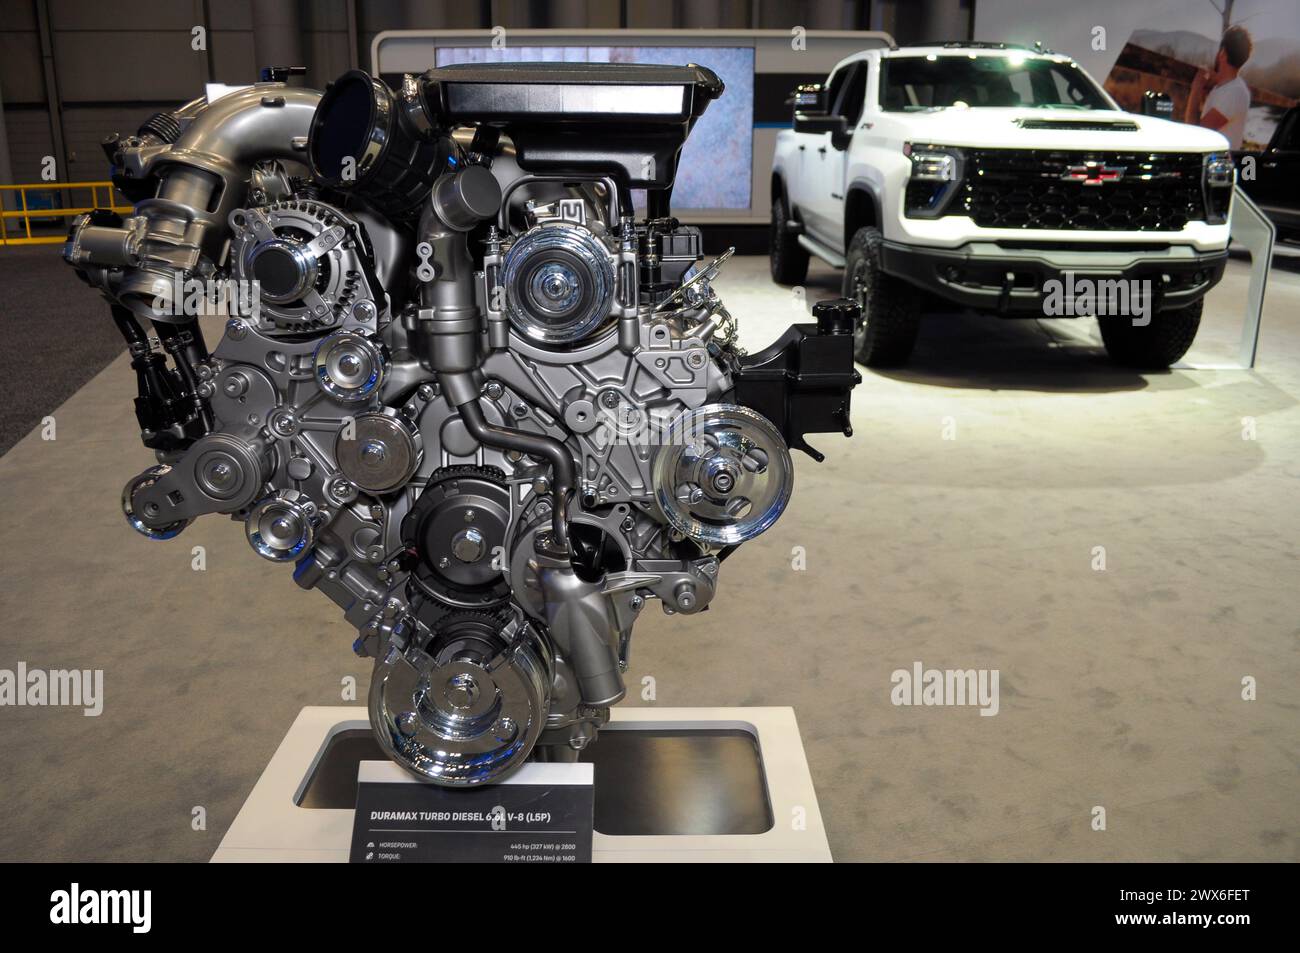 A Duramax Turbo Diesel 6.6L V-8 engine, left, is seen next to a 2024 Chevrolet Silverado HD ZR2 Bison vehicle on the first media day at the 2024 New York International Auto Show in the Jacob K. Javits Convention Center. The annual NYIAS in Manhattan, New York City featured various car companies, debuts of new vehicles and automobile industry professionals. The show which opens to the public on March 29 and ends on April 7, attracts thousands of car enthusiasts. The NYIAS began in 1900 showcasing automobiles and examples of future car technology. (Photo by Jimin Kim/SOPA Images/Sipa USA) Stock Photo